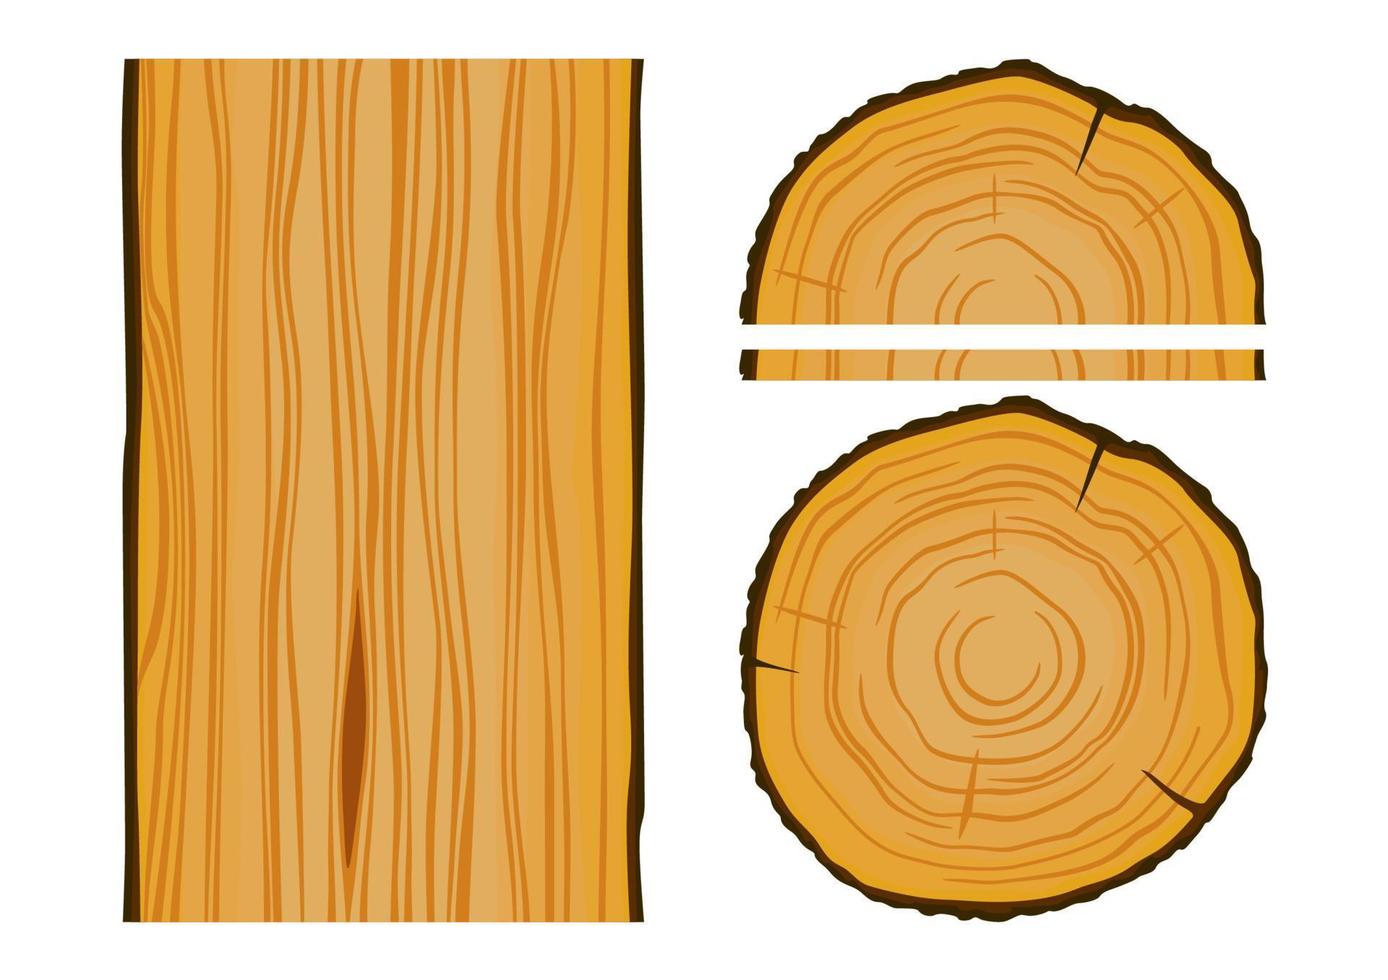 Timber and wood texture with elements vector